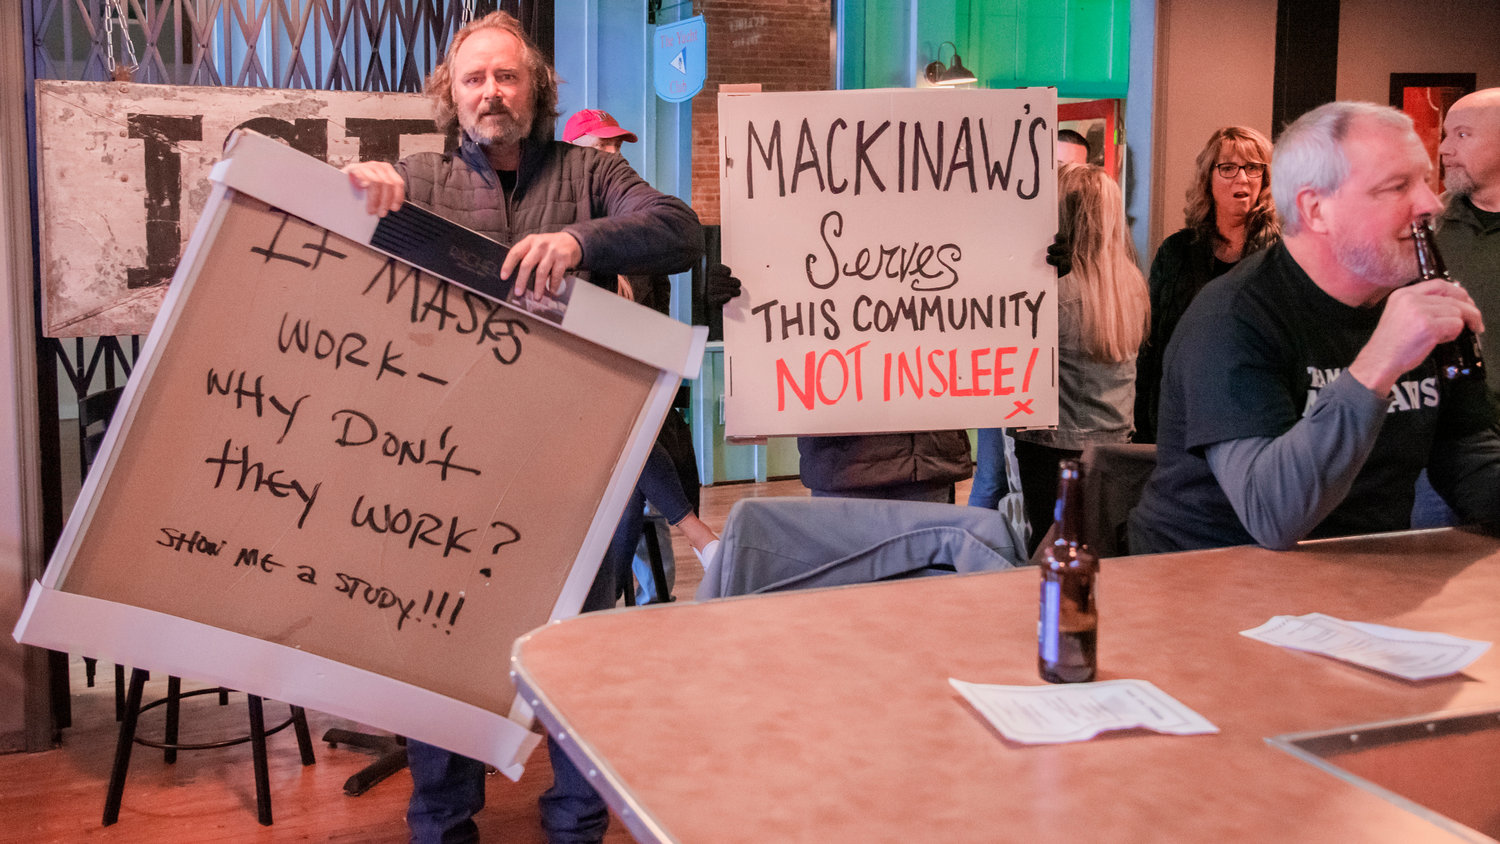 Supporters of Mackinaw’s display signs as members of the State Liquor Control Board remove alcohol from the premises Friday morning at Curious The Bar in Chehalis.